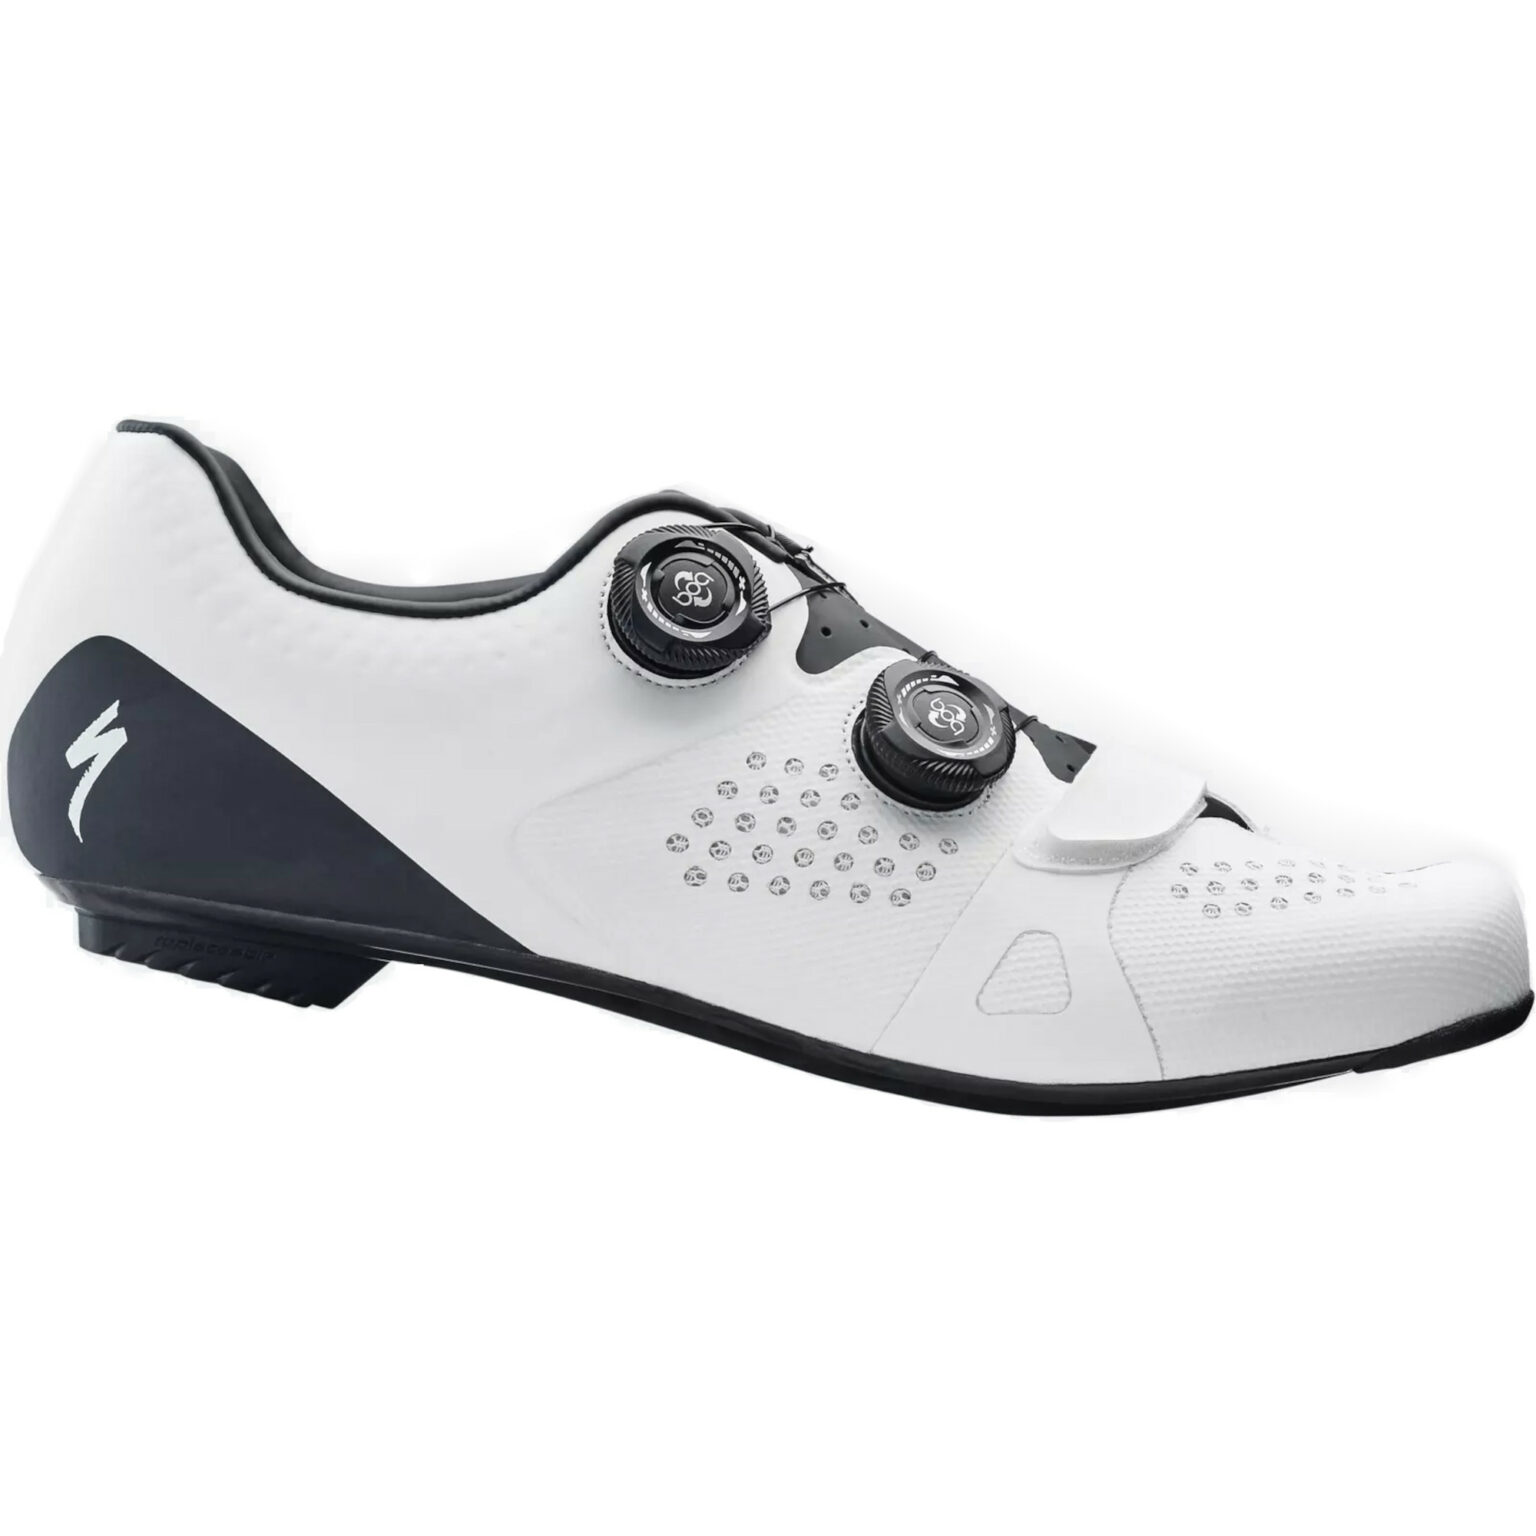 Scarpe Specialized Torch 3.0 Road